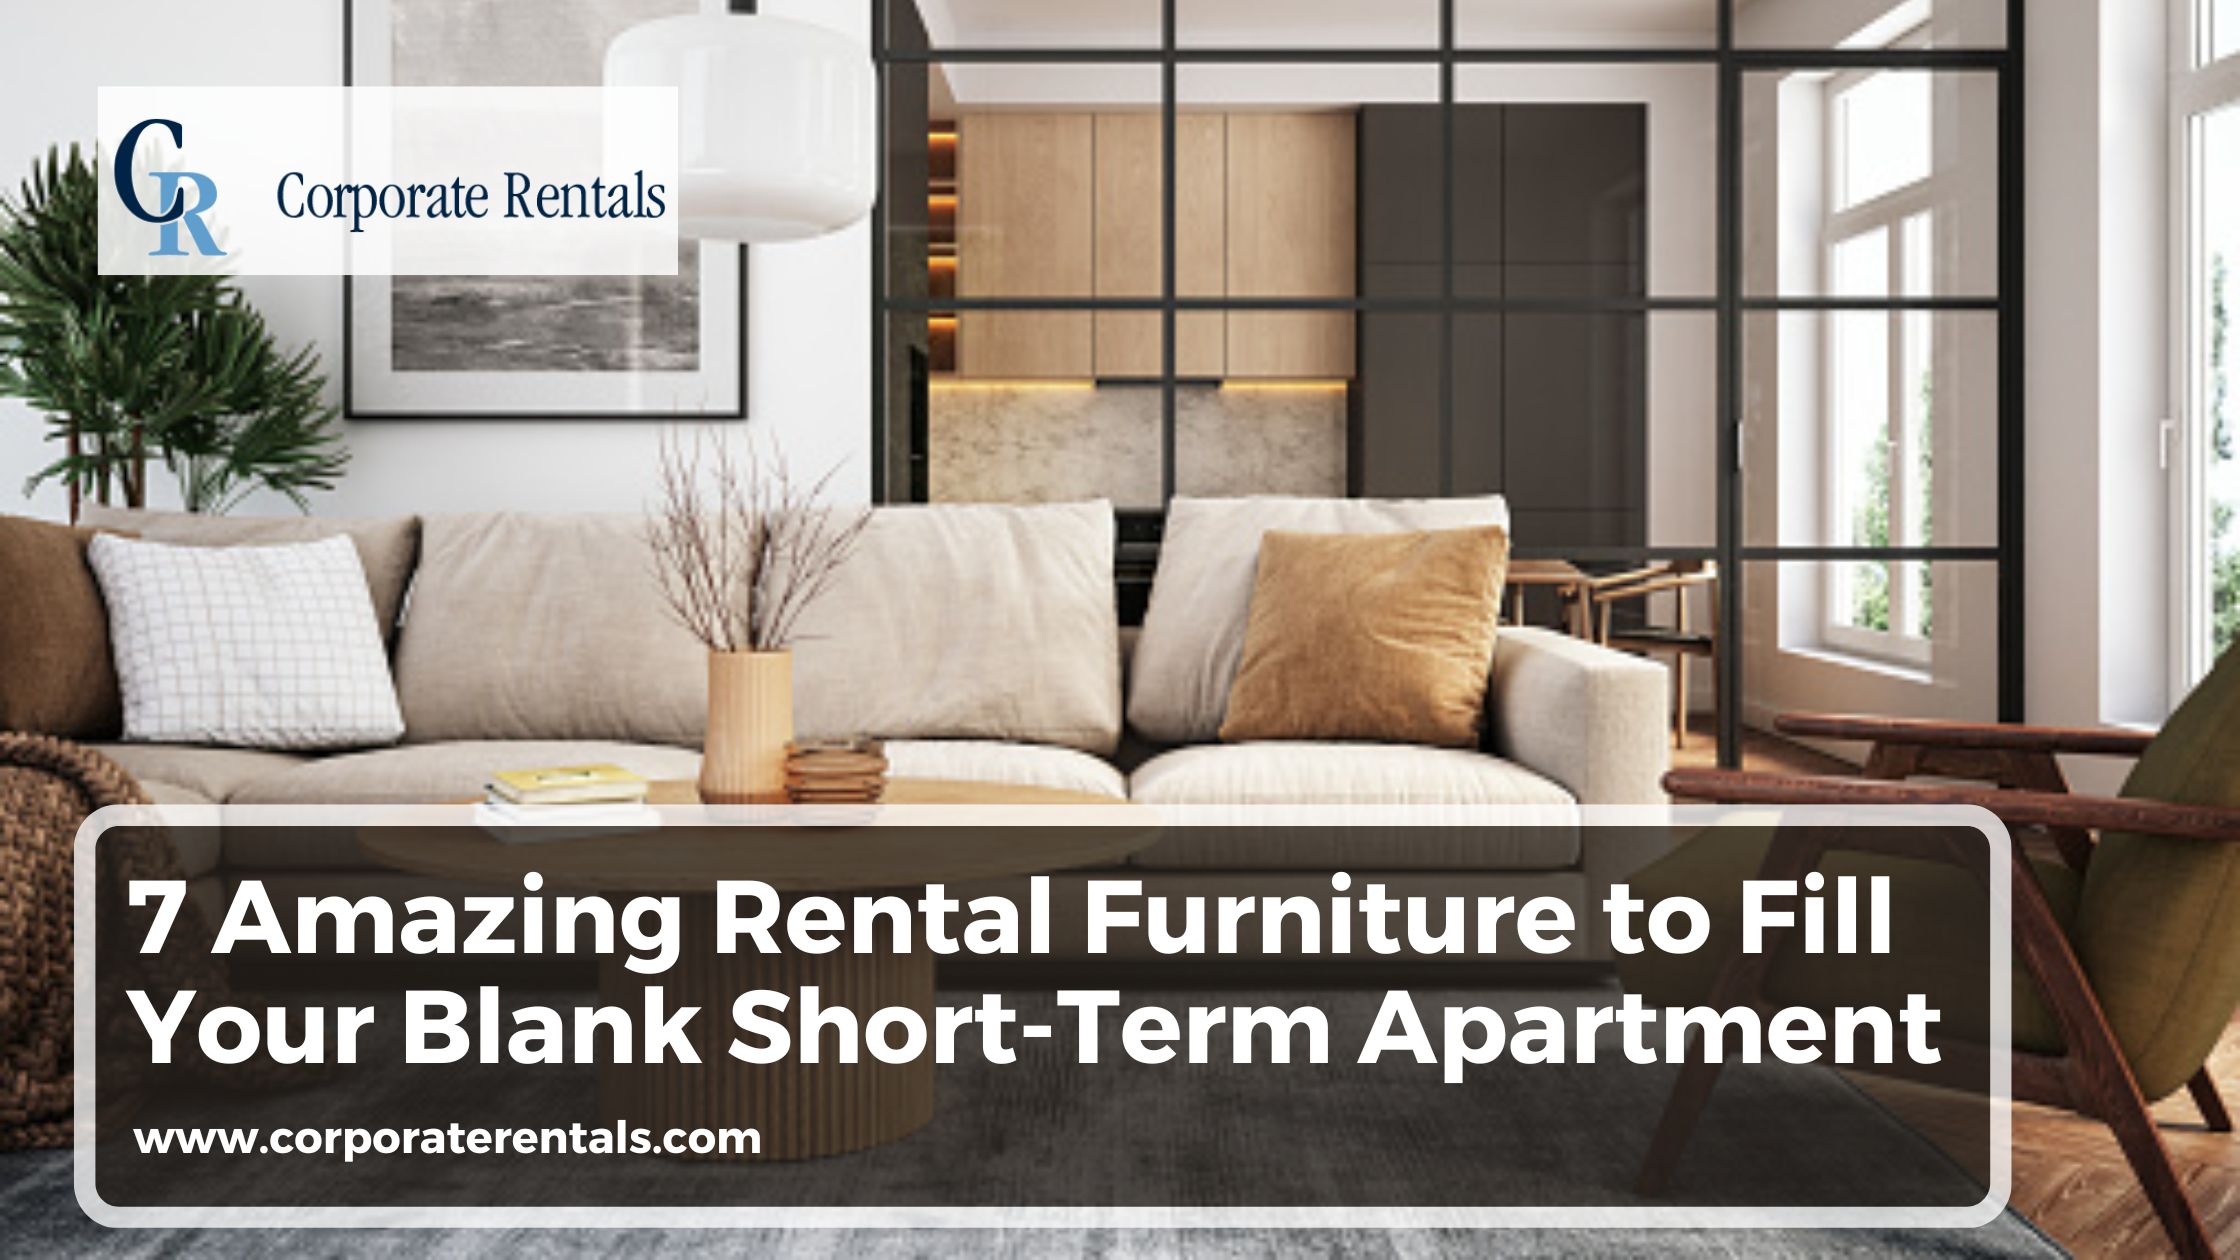 7 Amazing Rental Furniture to Fill Your Blank Short-Term Apartment